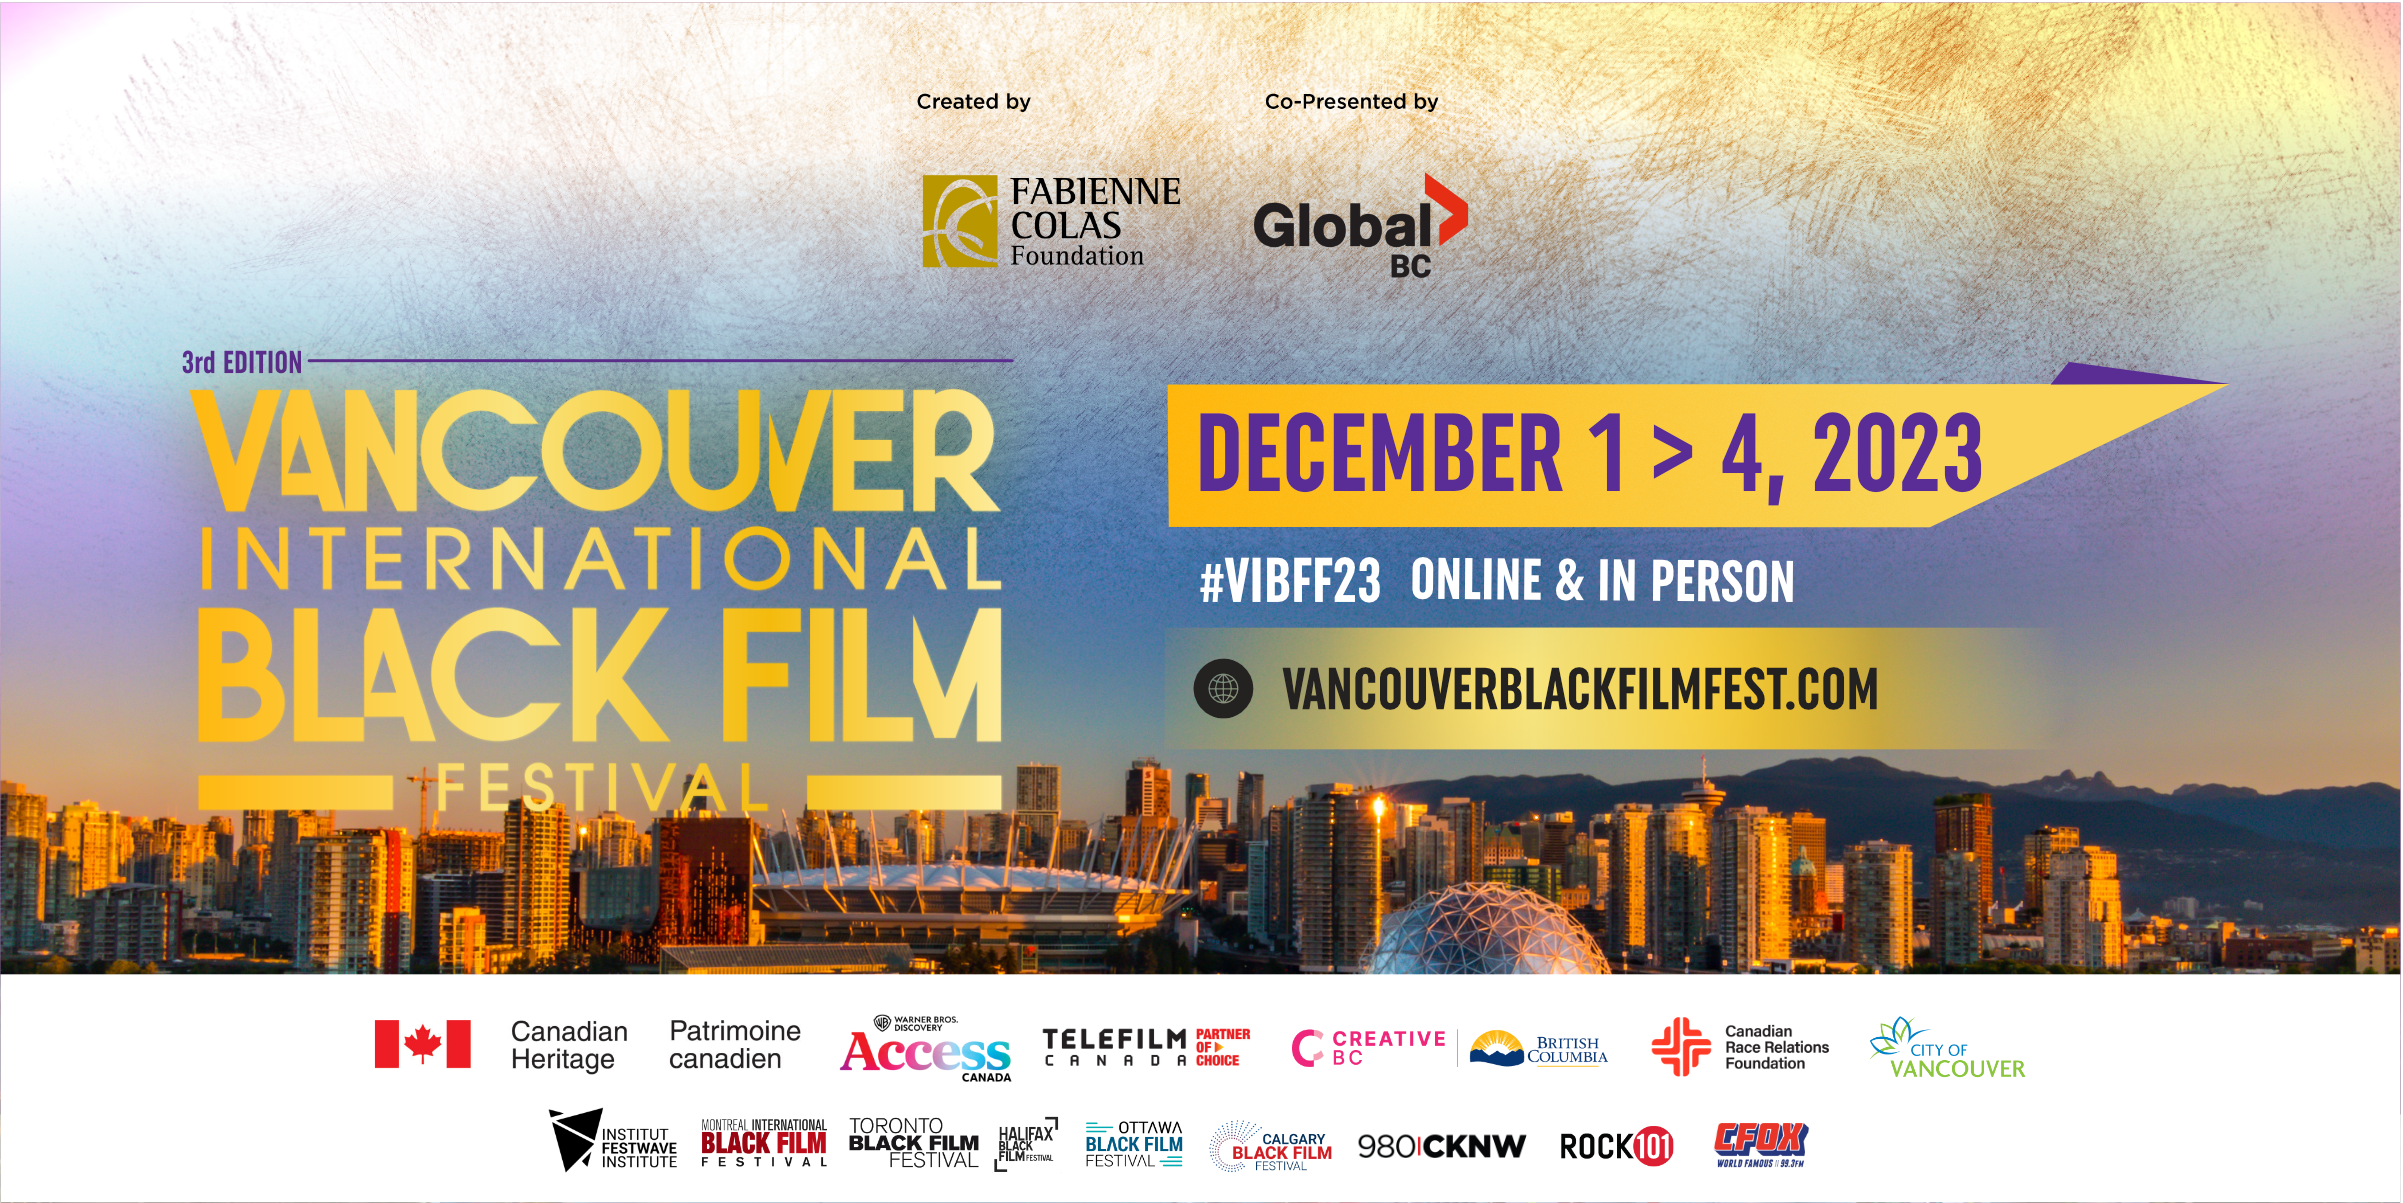 3RD EDITION OF THE VANCOUVER INTERNATIONAL BLACK FILM FESTIVAL IS BACK FROM DECEMBER 1 – 4, 2023 Celebrating Cultural Diversity and Creative Excellence with 40 films from around the globe!